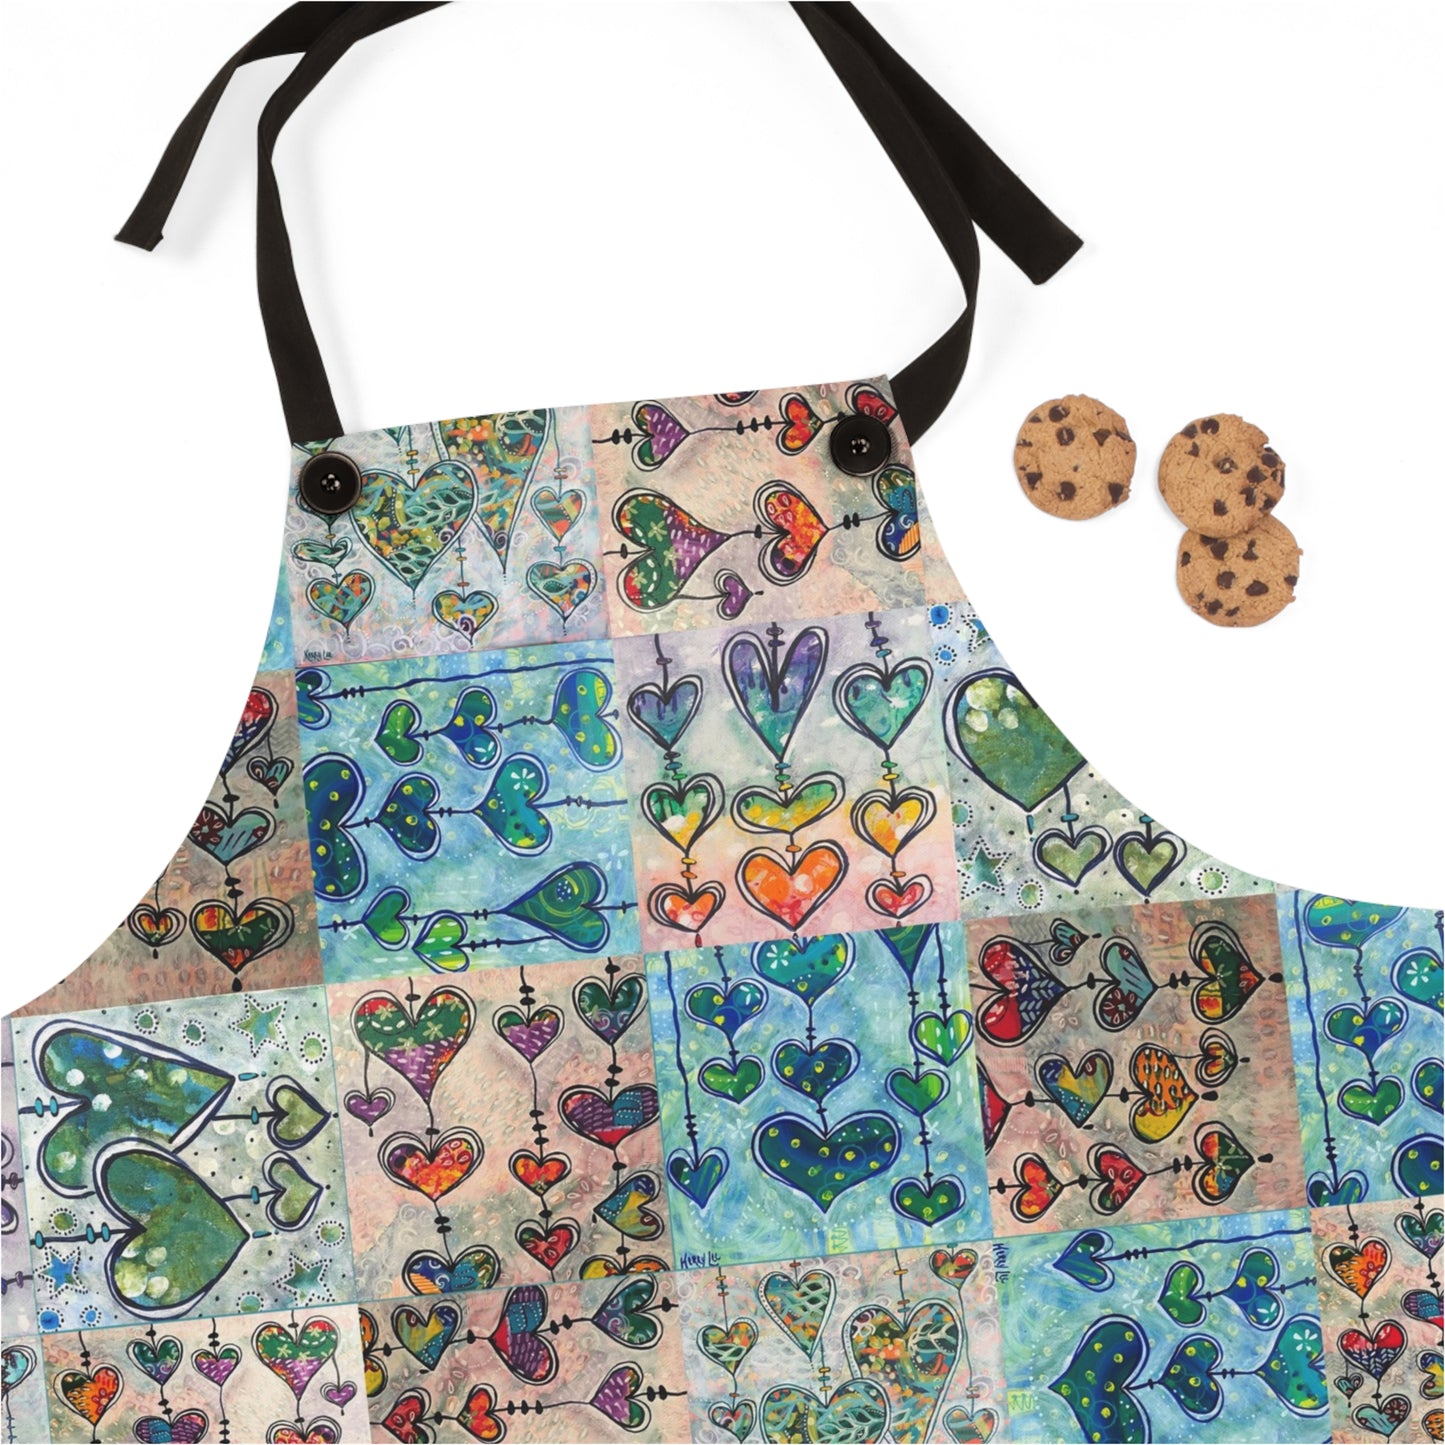 Apron: "Patchwork Whimsical Hearts"